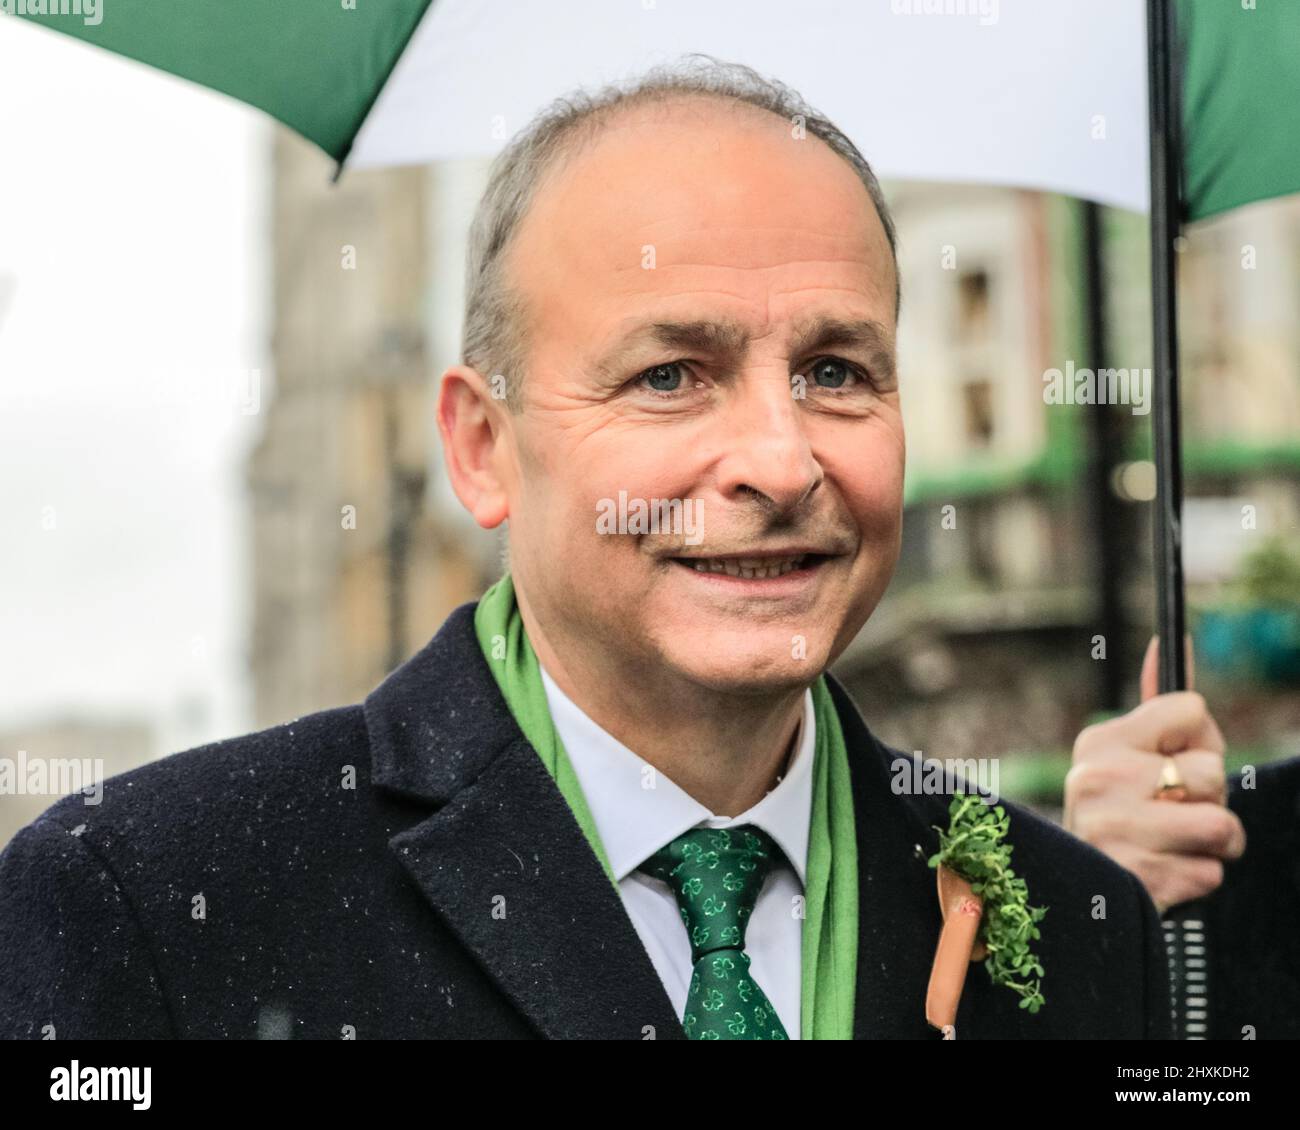 London, UK. 13th Mar, 2022. Micheál Martin, Irish Taoiseach (Prime Minister) leads at the front of the London St Patrick's Day Parade. Credit: Imageplotter/Alamy Live News Stock Photo